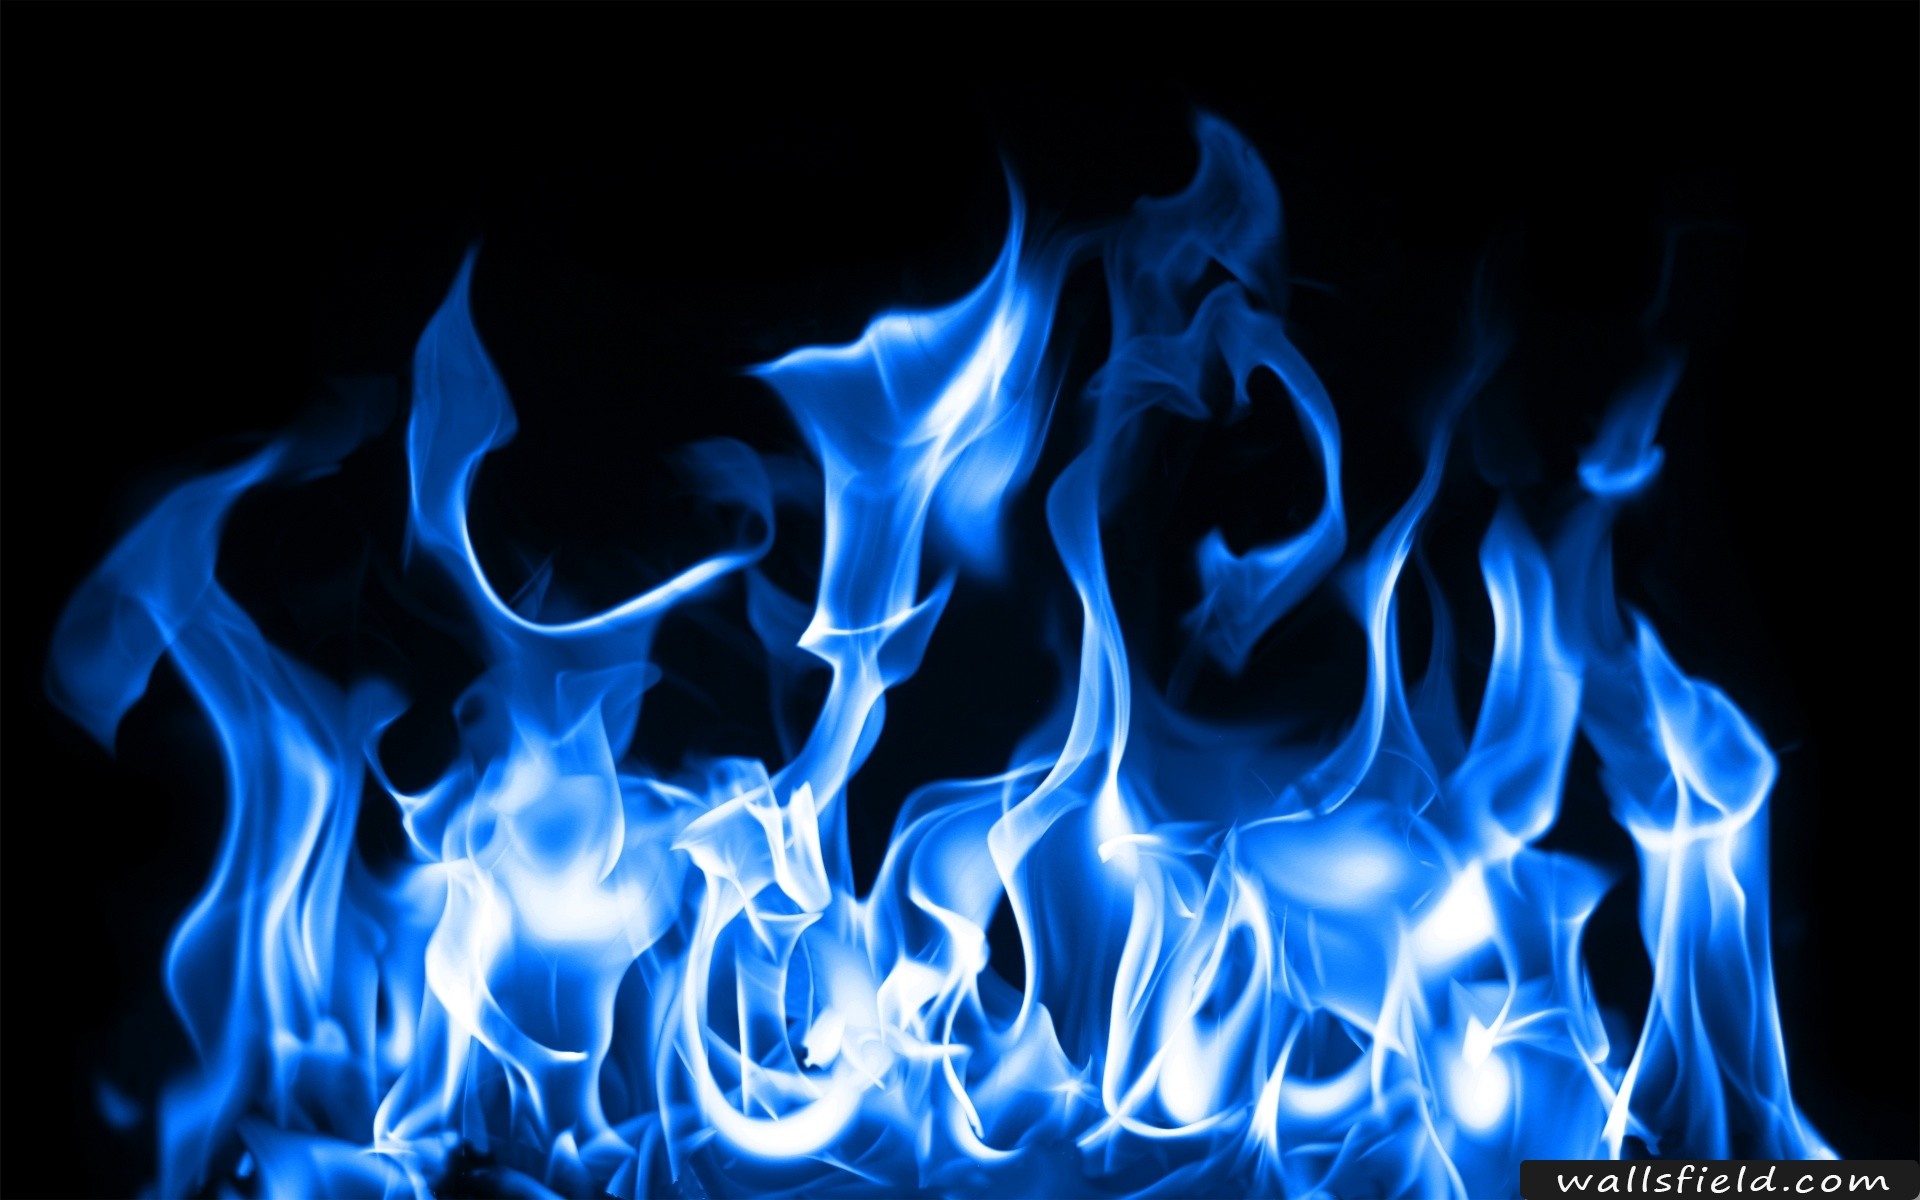 You can view, download and comment on Blue Fire free hd wallpapers for your desktop